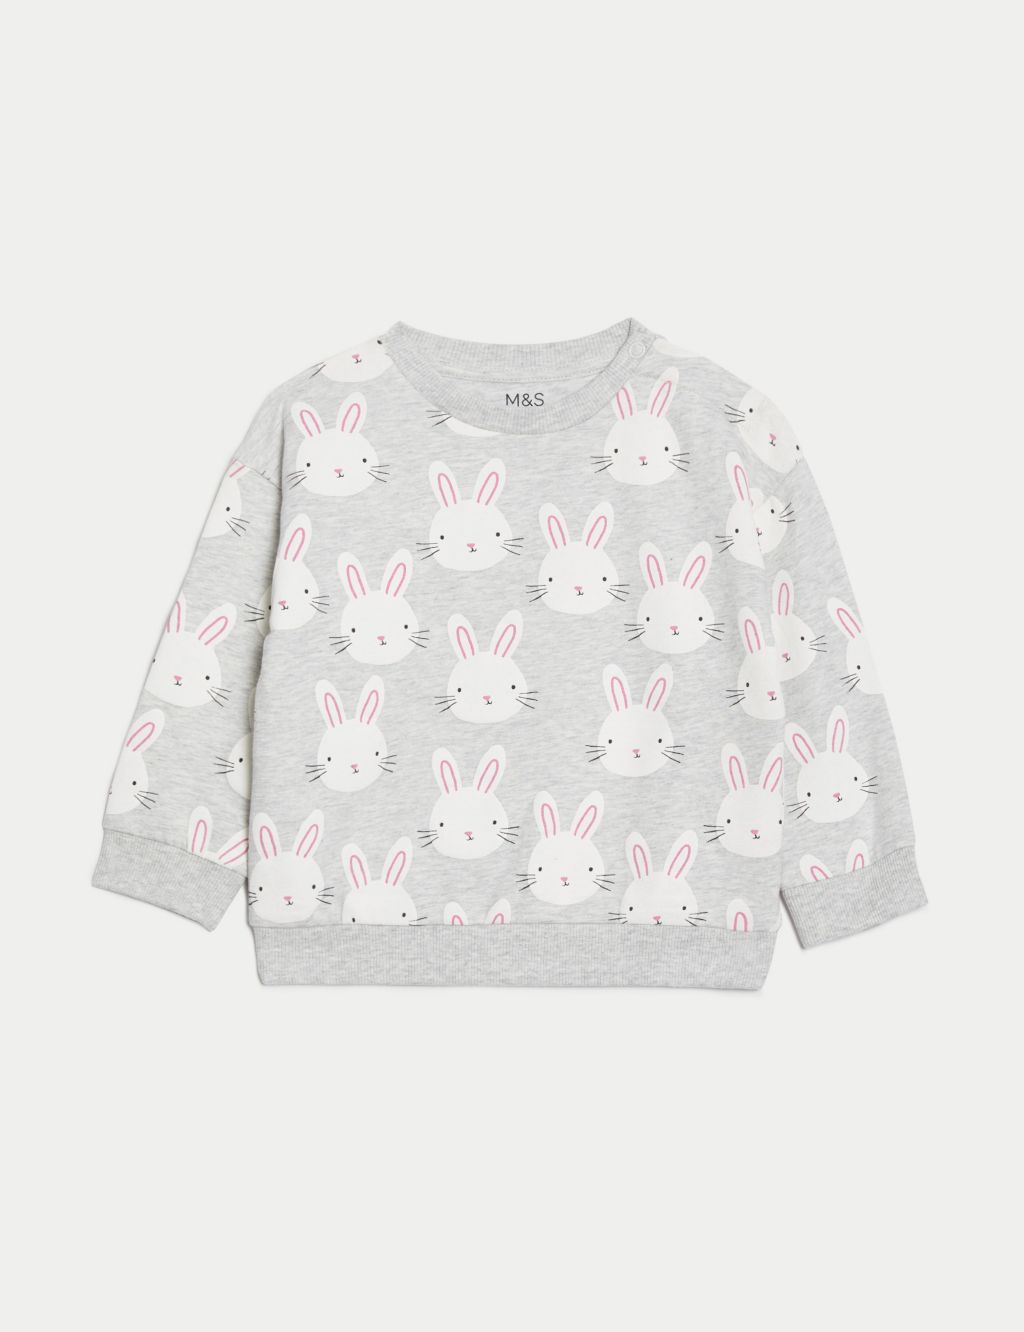 2pc Cotton Rich Bunny Print Outfit (0-3 Yrs) image 3